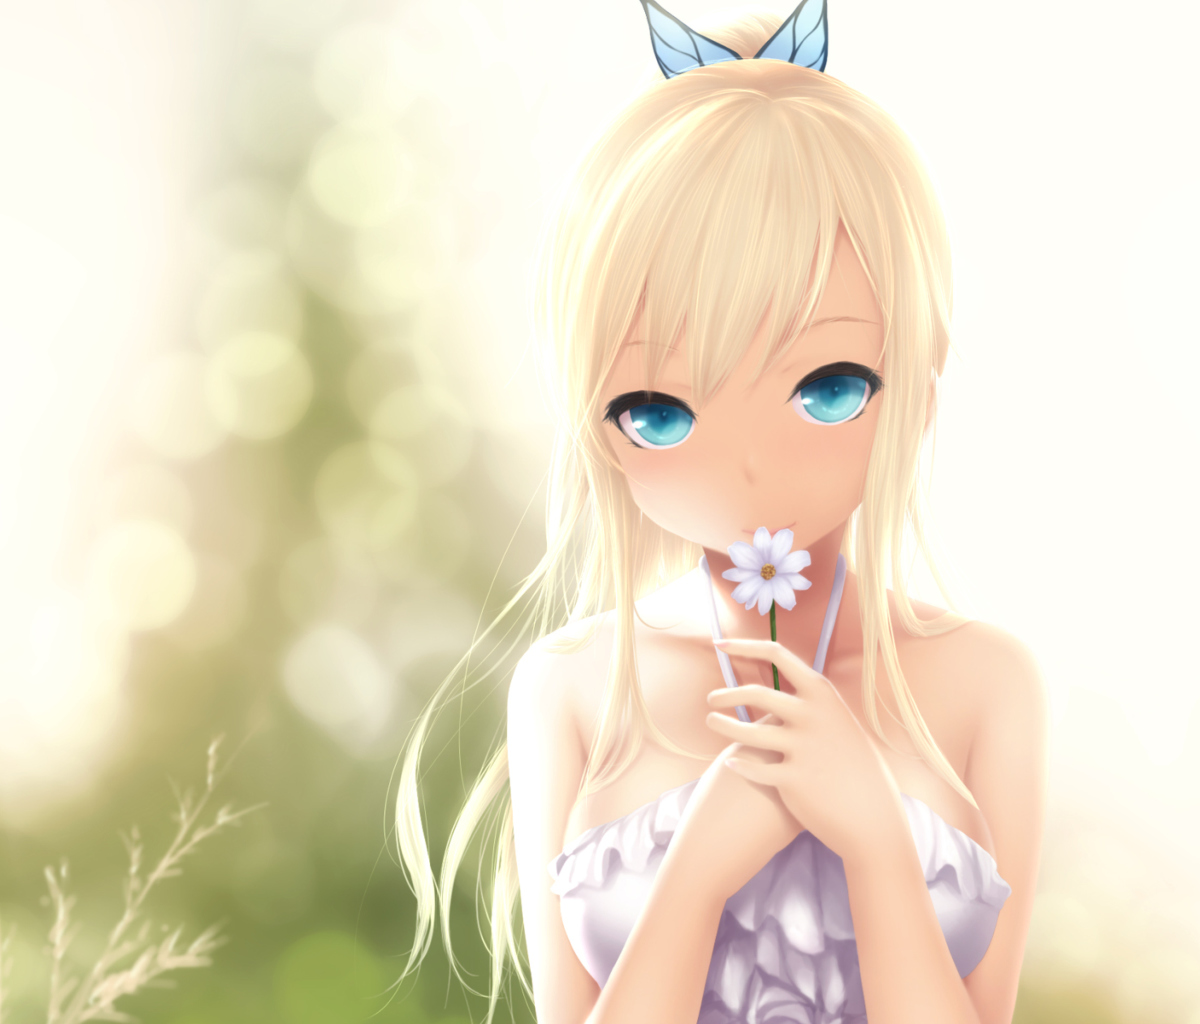 Anime Blonde With Daisy wallpaper 1200x1024